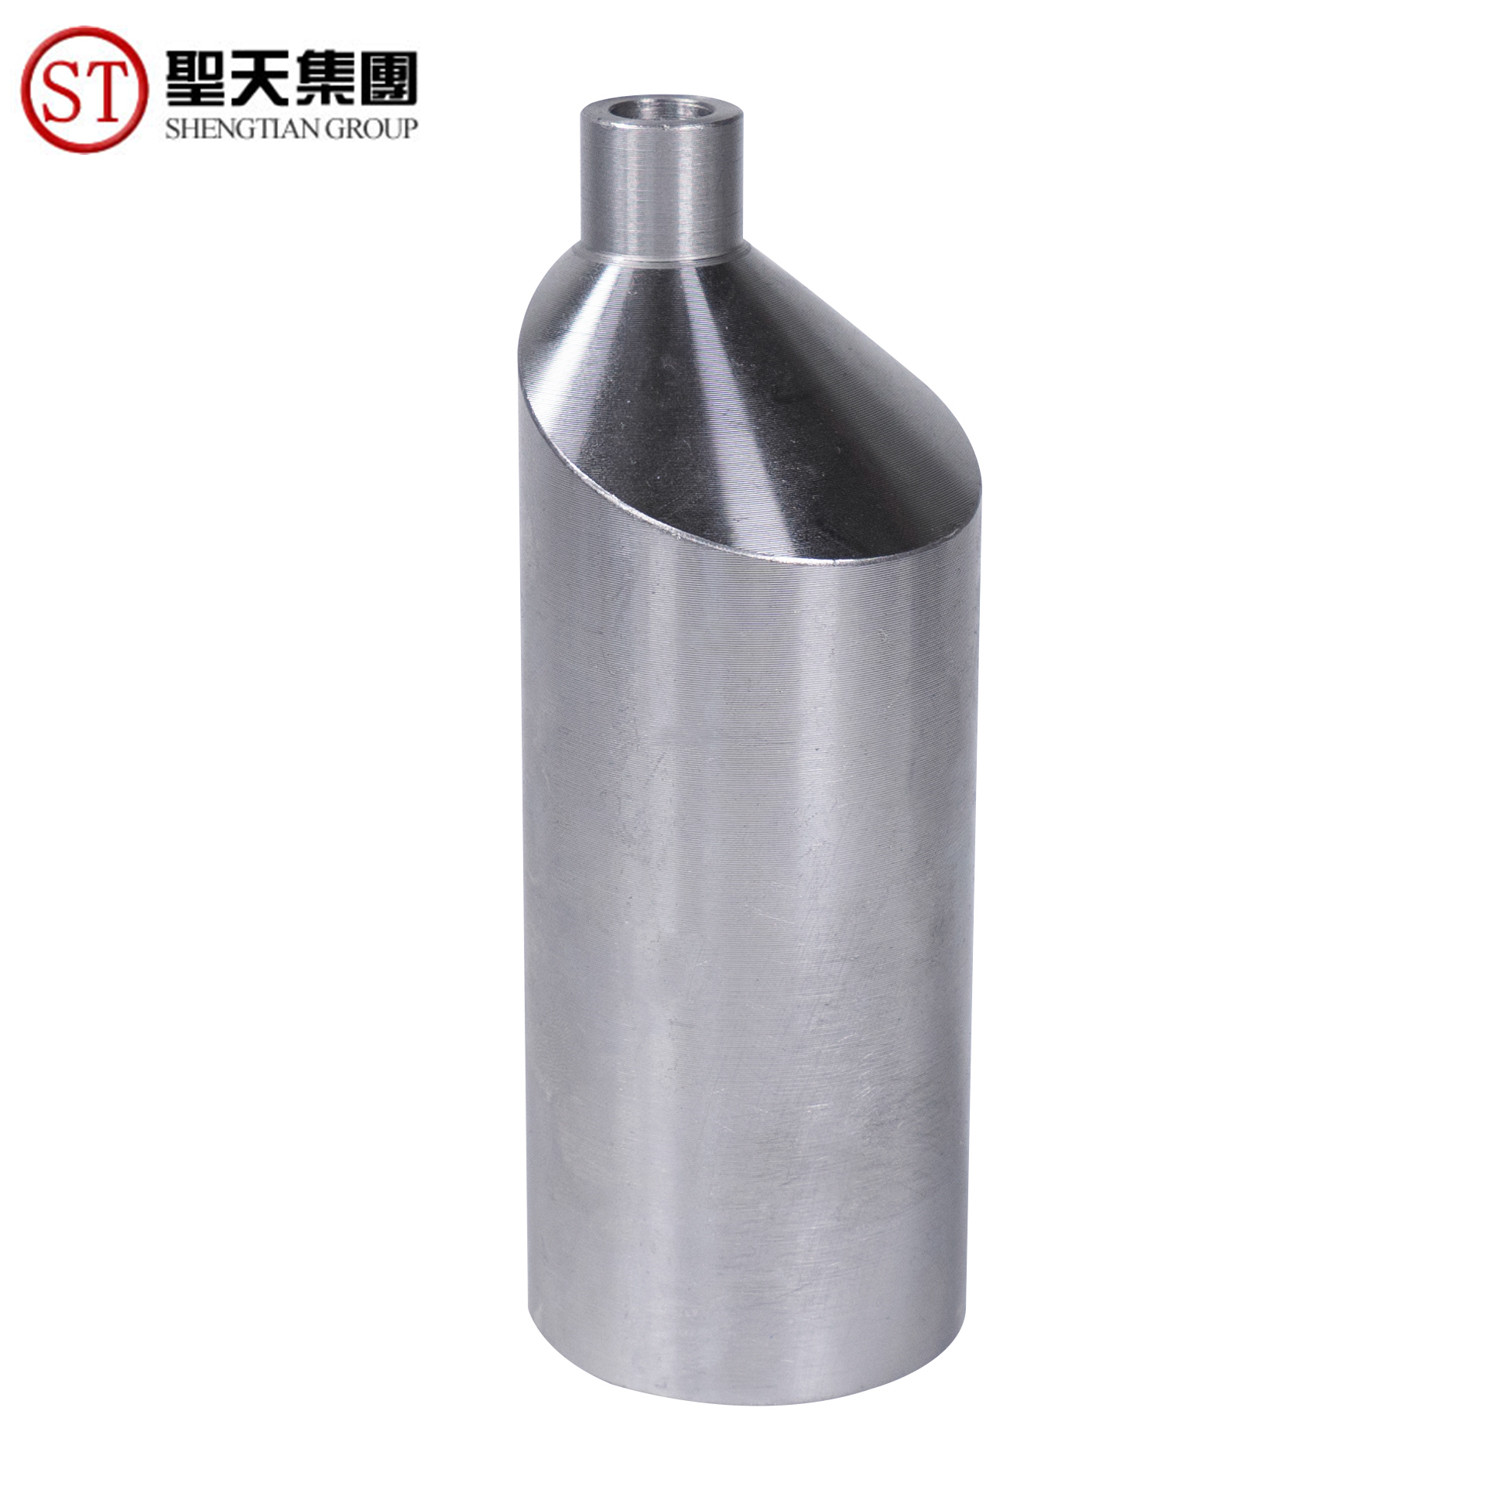 Mss-Sp-95 Stainless Steel A182 Eccenthic Swaged High Press Nipple